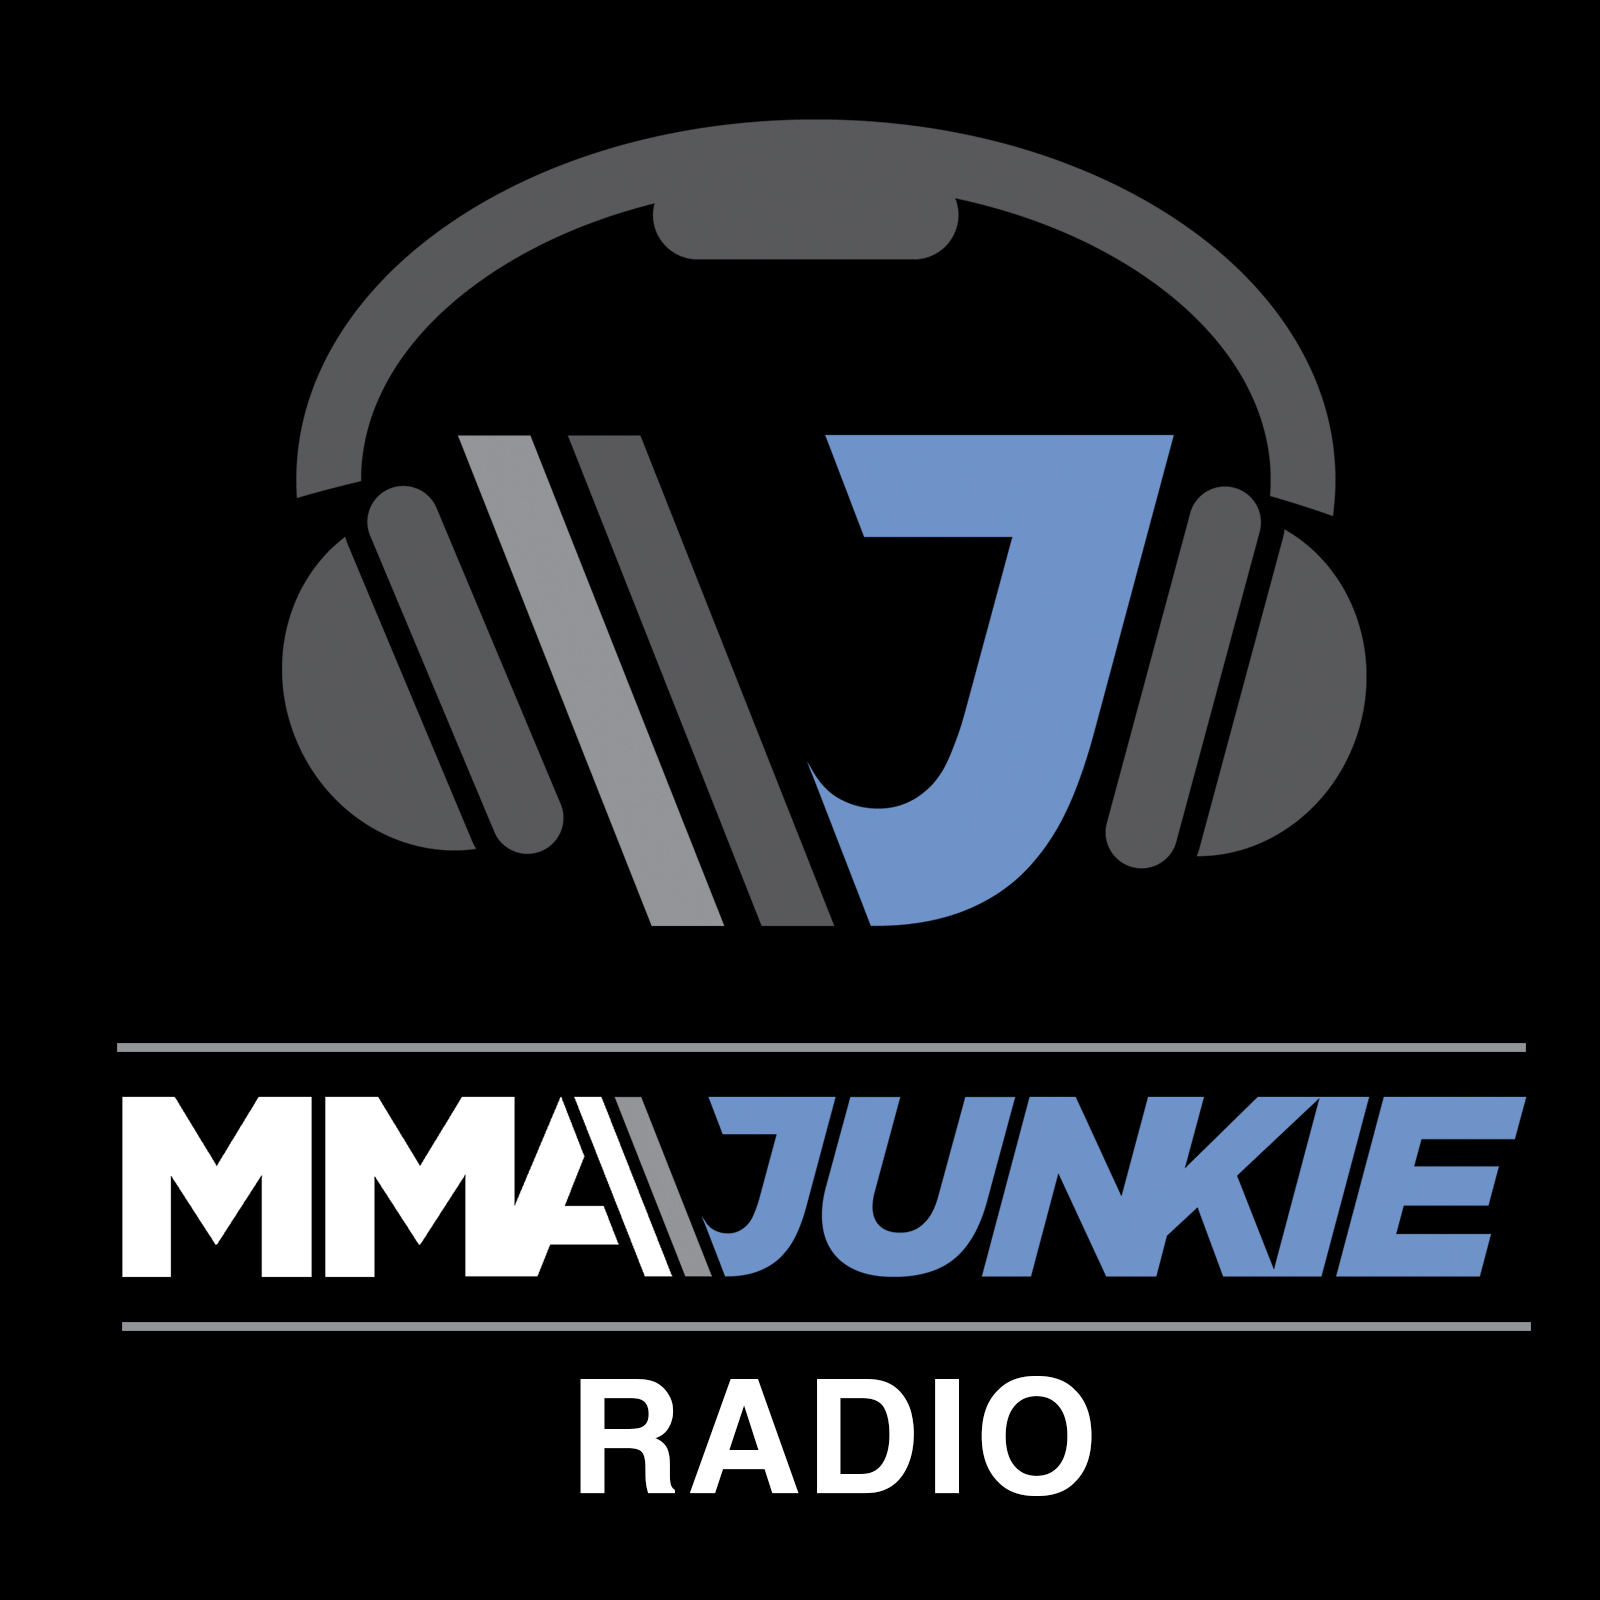 Ep. #3231: Joe Lauzon joins the show, the MMA in 2022 themes, more